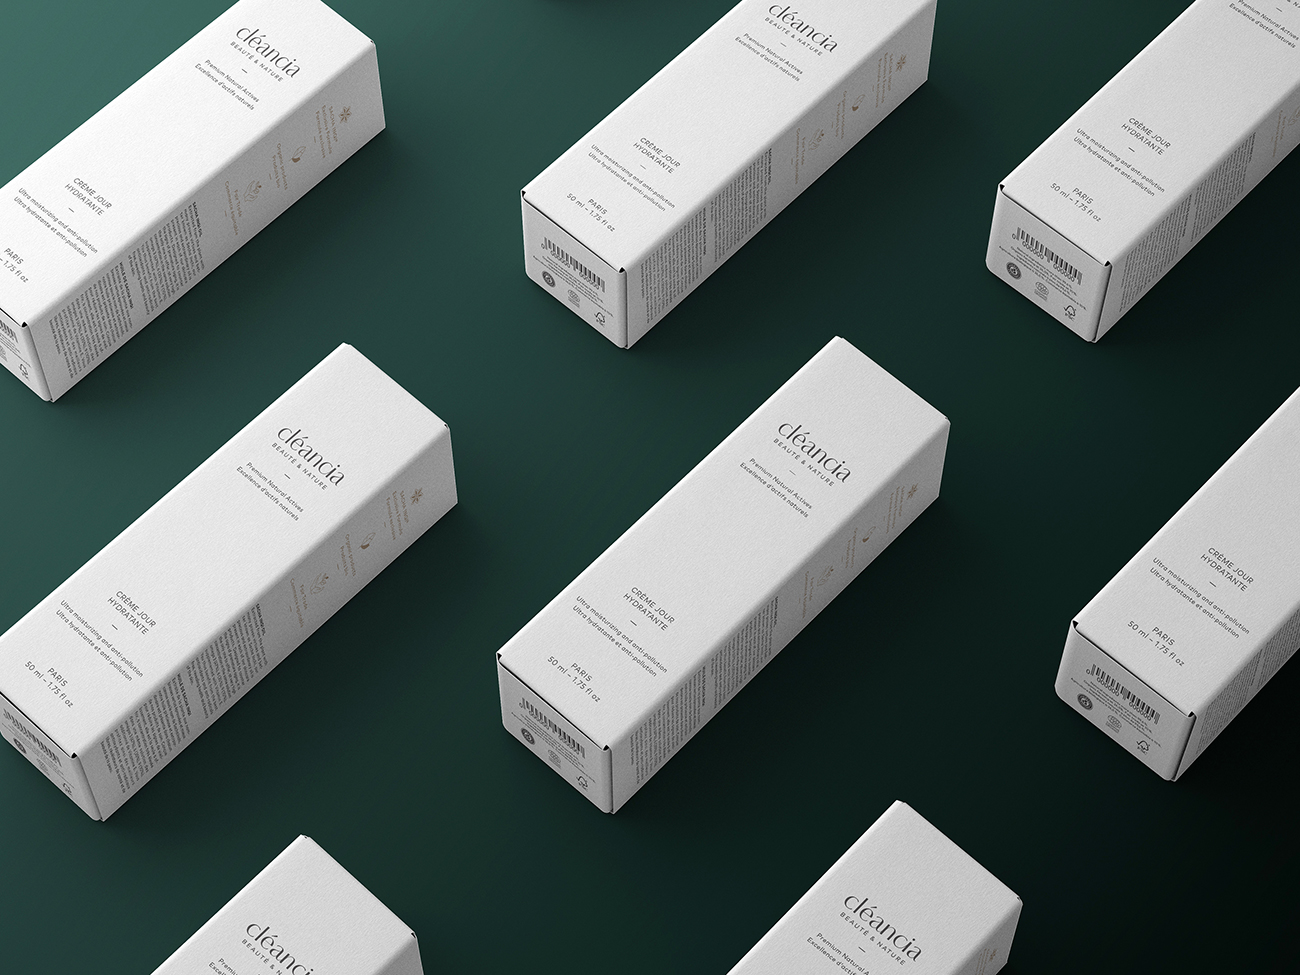 cleancia_branding_by-catherine-bisaillon_1300x975_005